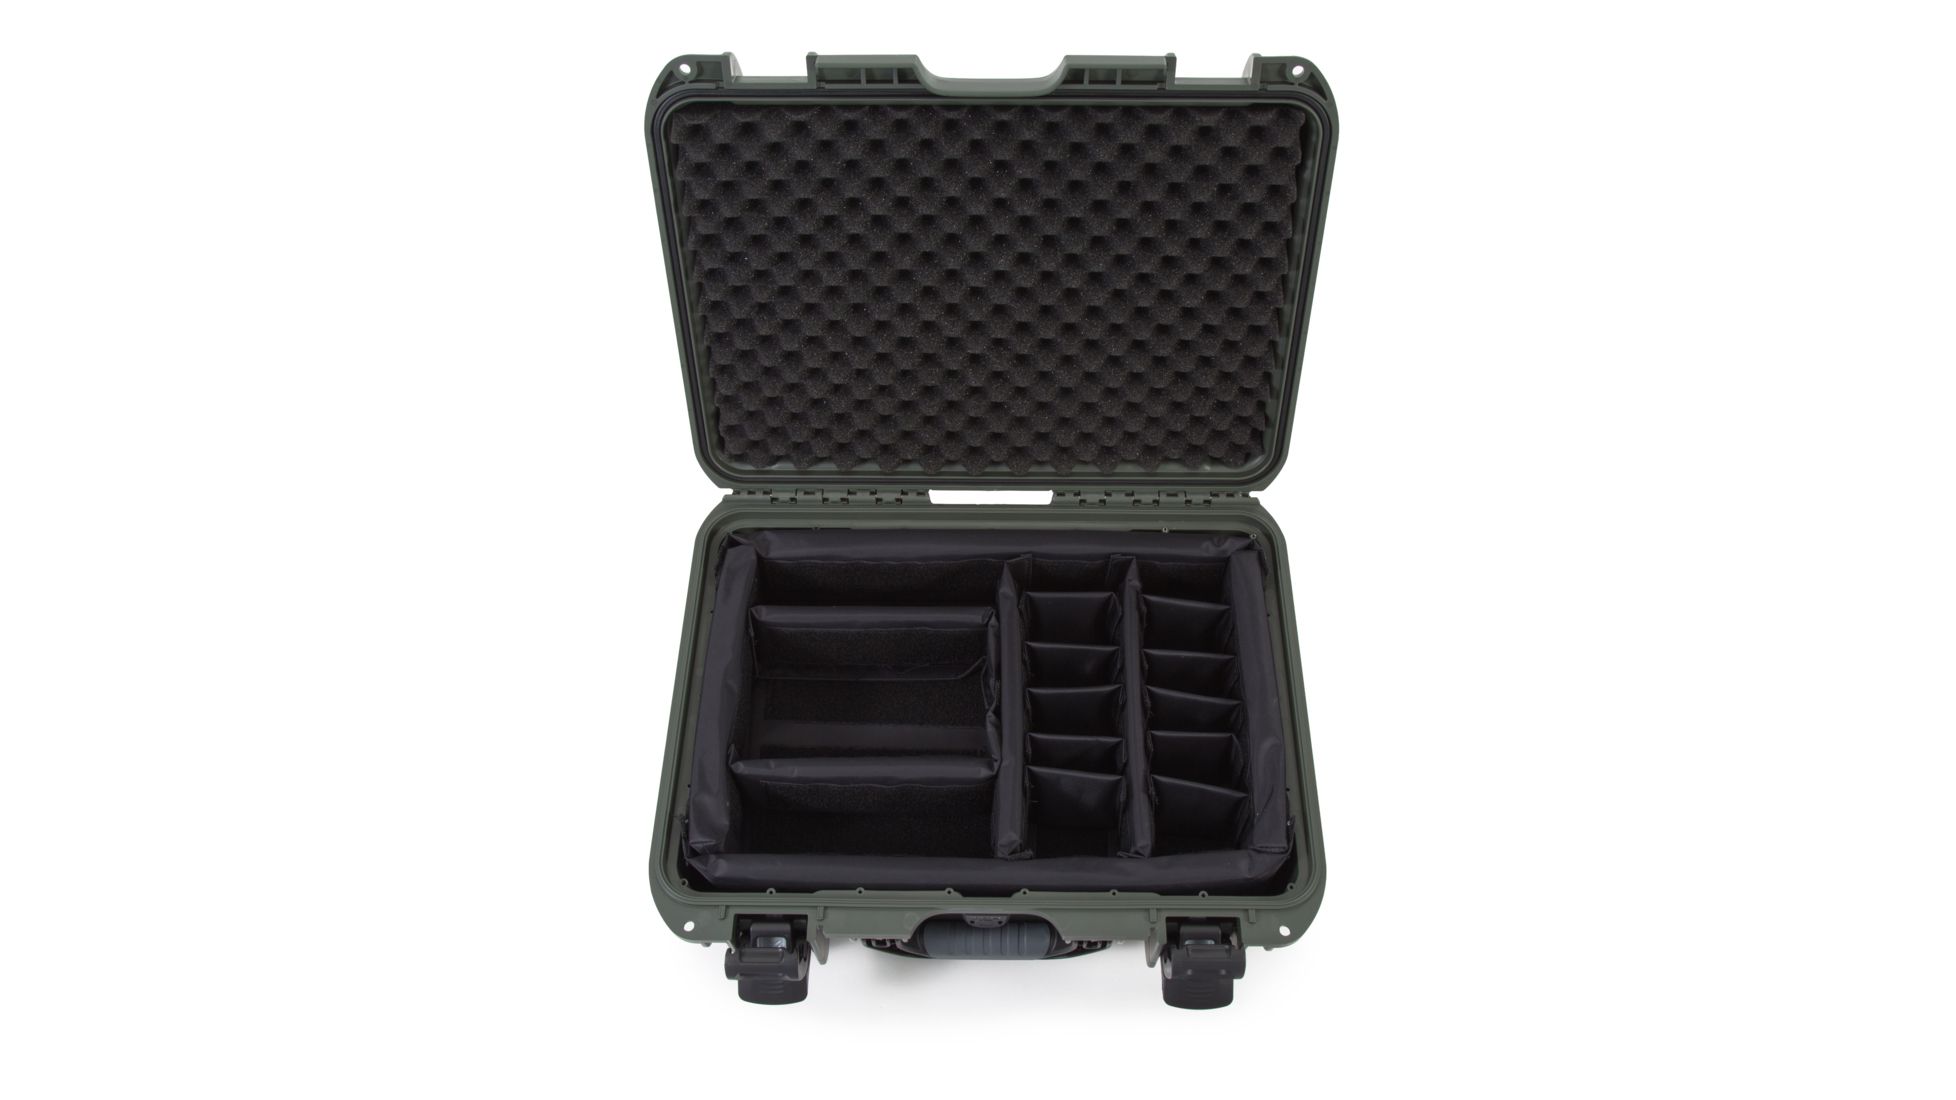 Nanuk 925 Protective Case with Padded Divider | Up to 39% Off 5 Star